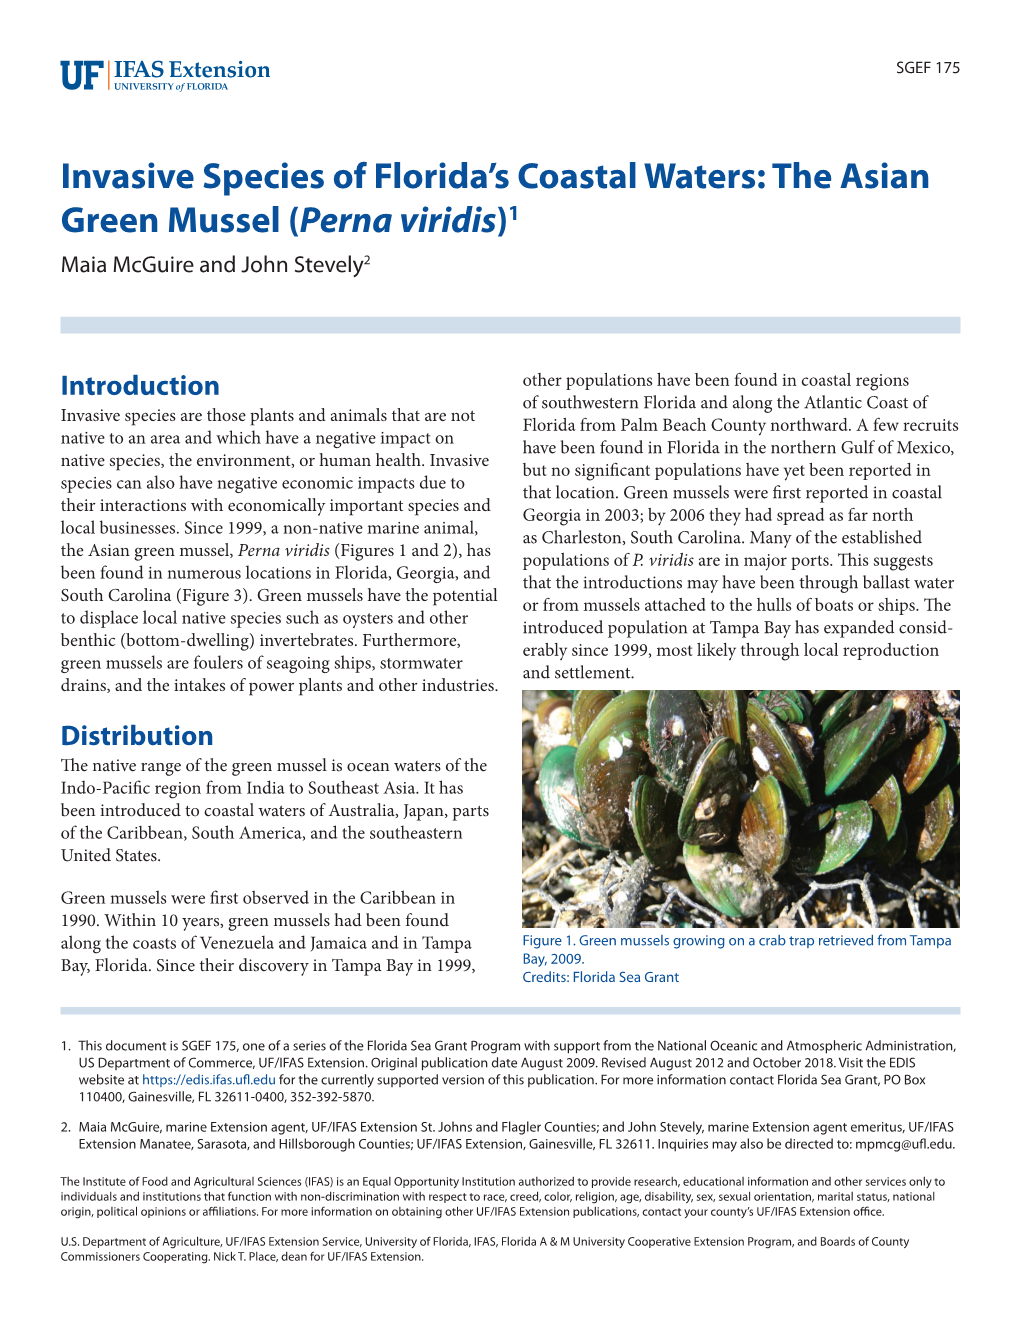 Invasive Species of Florida's Coastal Waters: the Asian Green Mussel